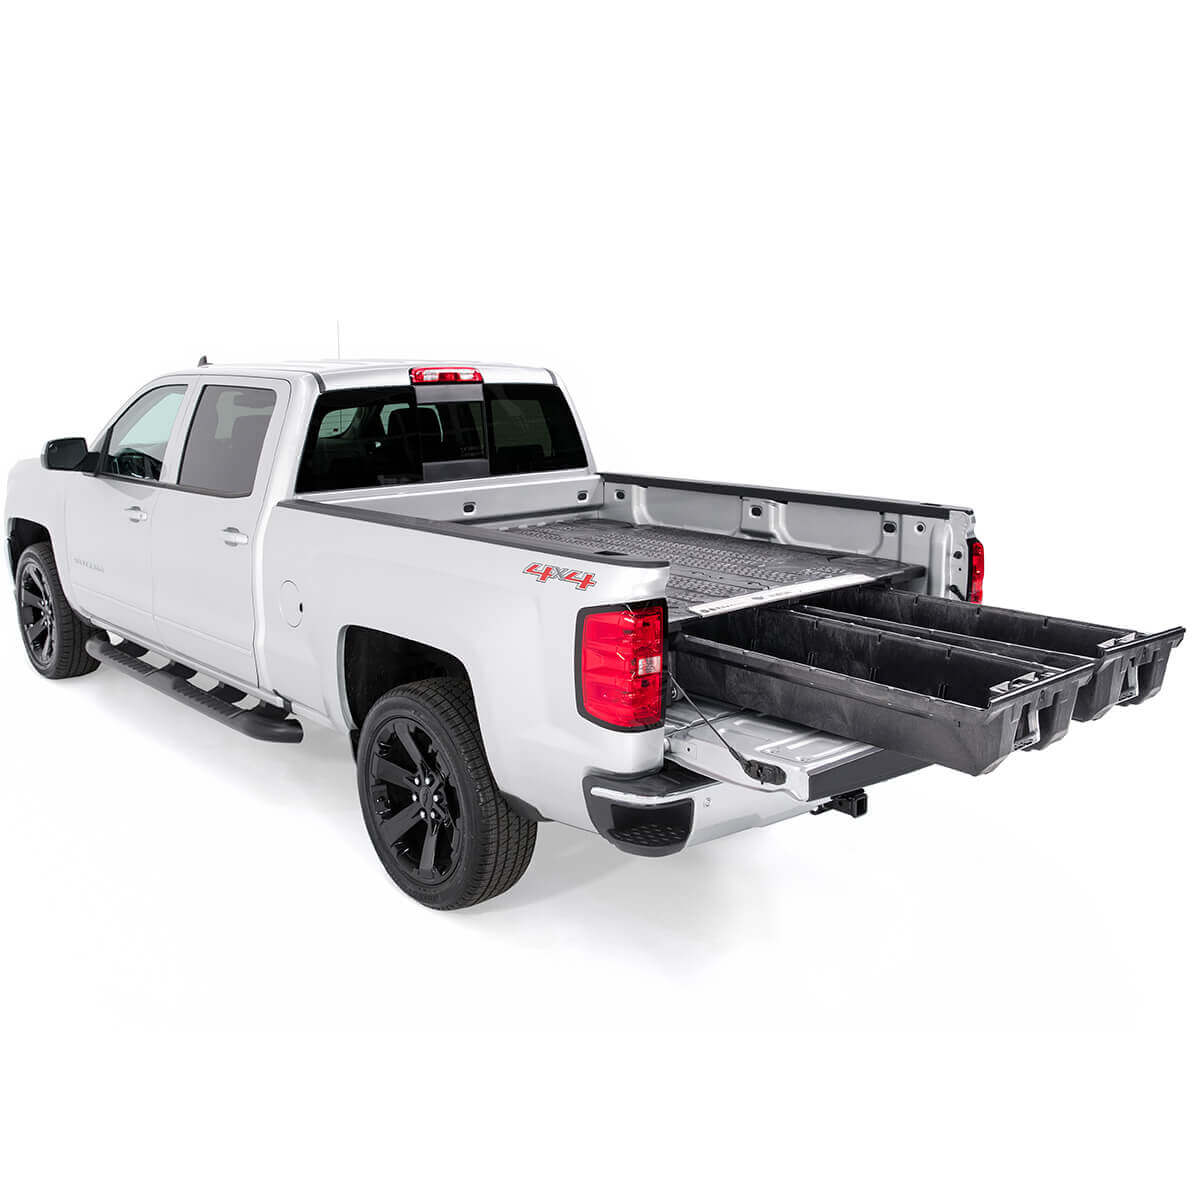 Decked 6ft. 6in. Bed Length Storage System for Sierra or Silverado 1500 (2019+) - New wide bed width